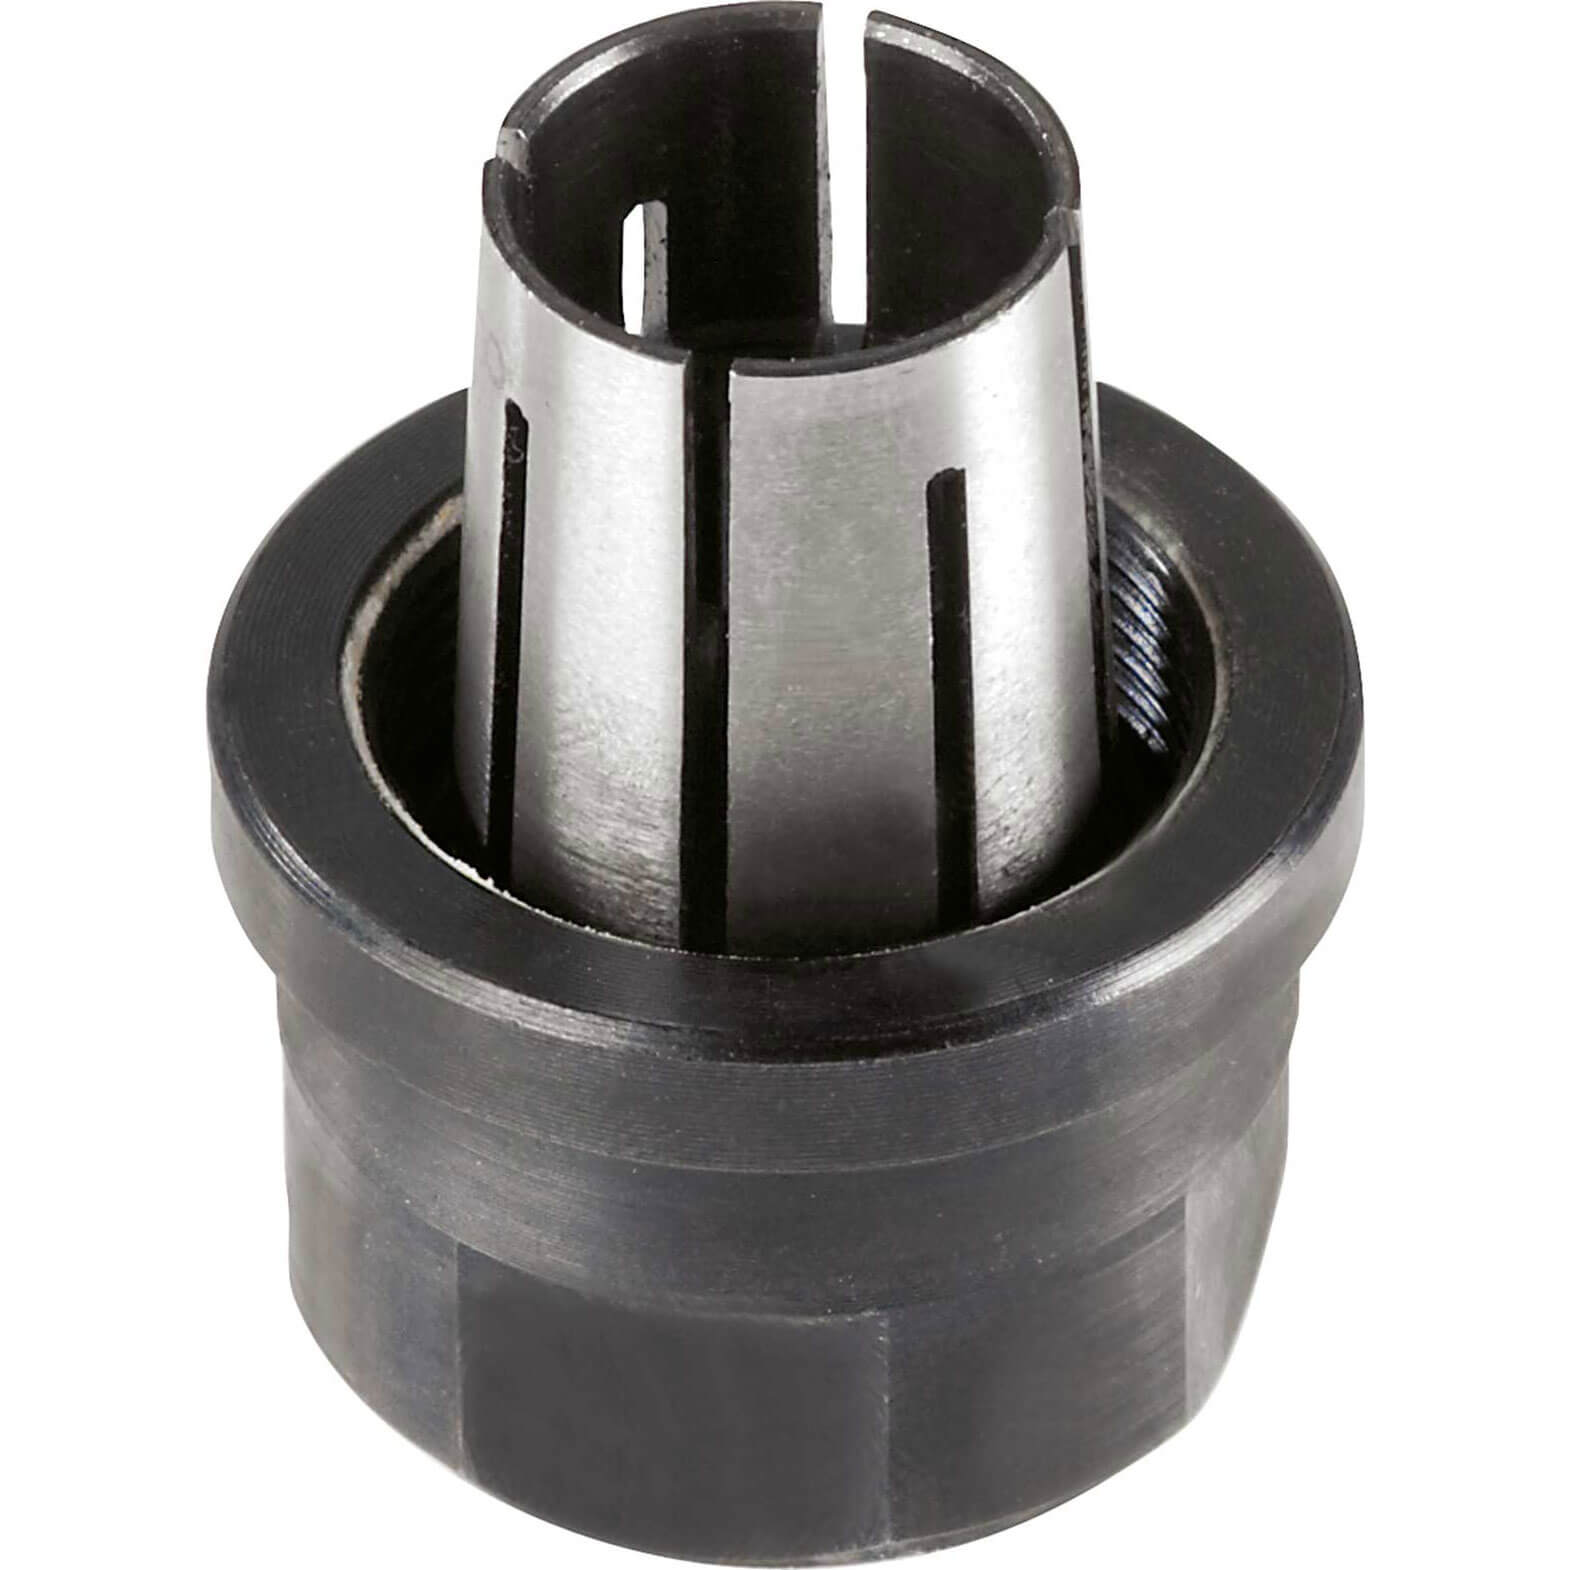 Image of Festool Router Collet For Festool Router OF2200 1/2"